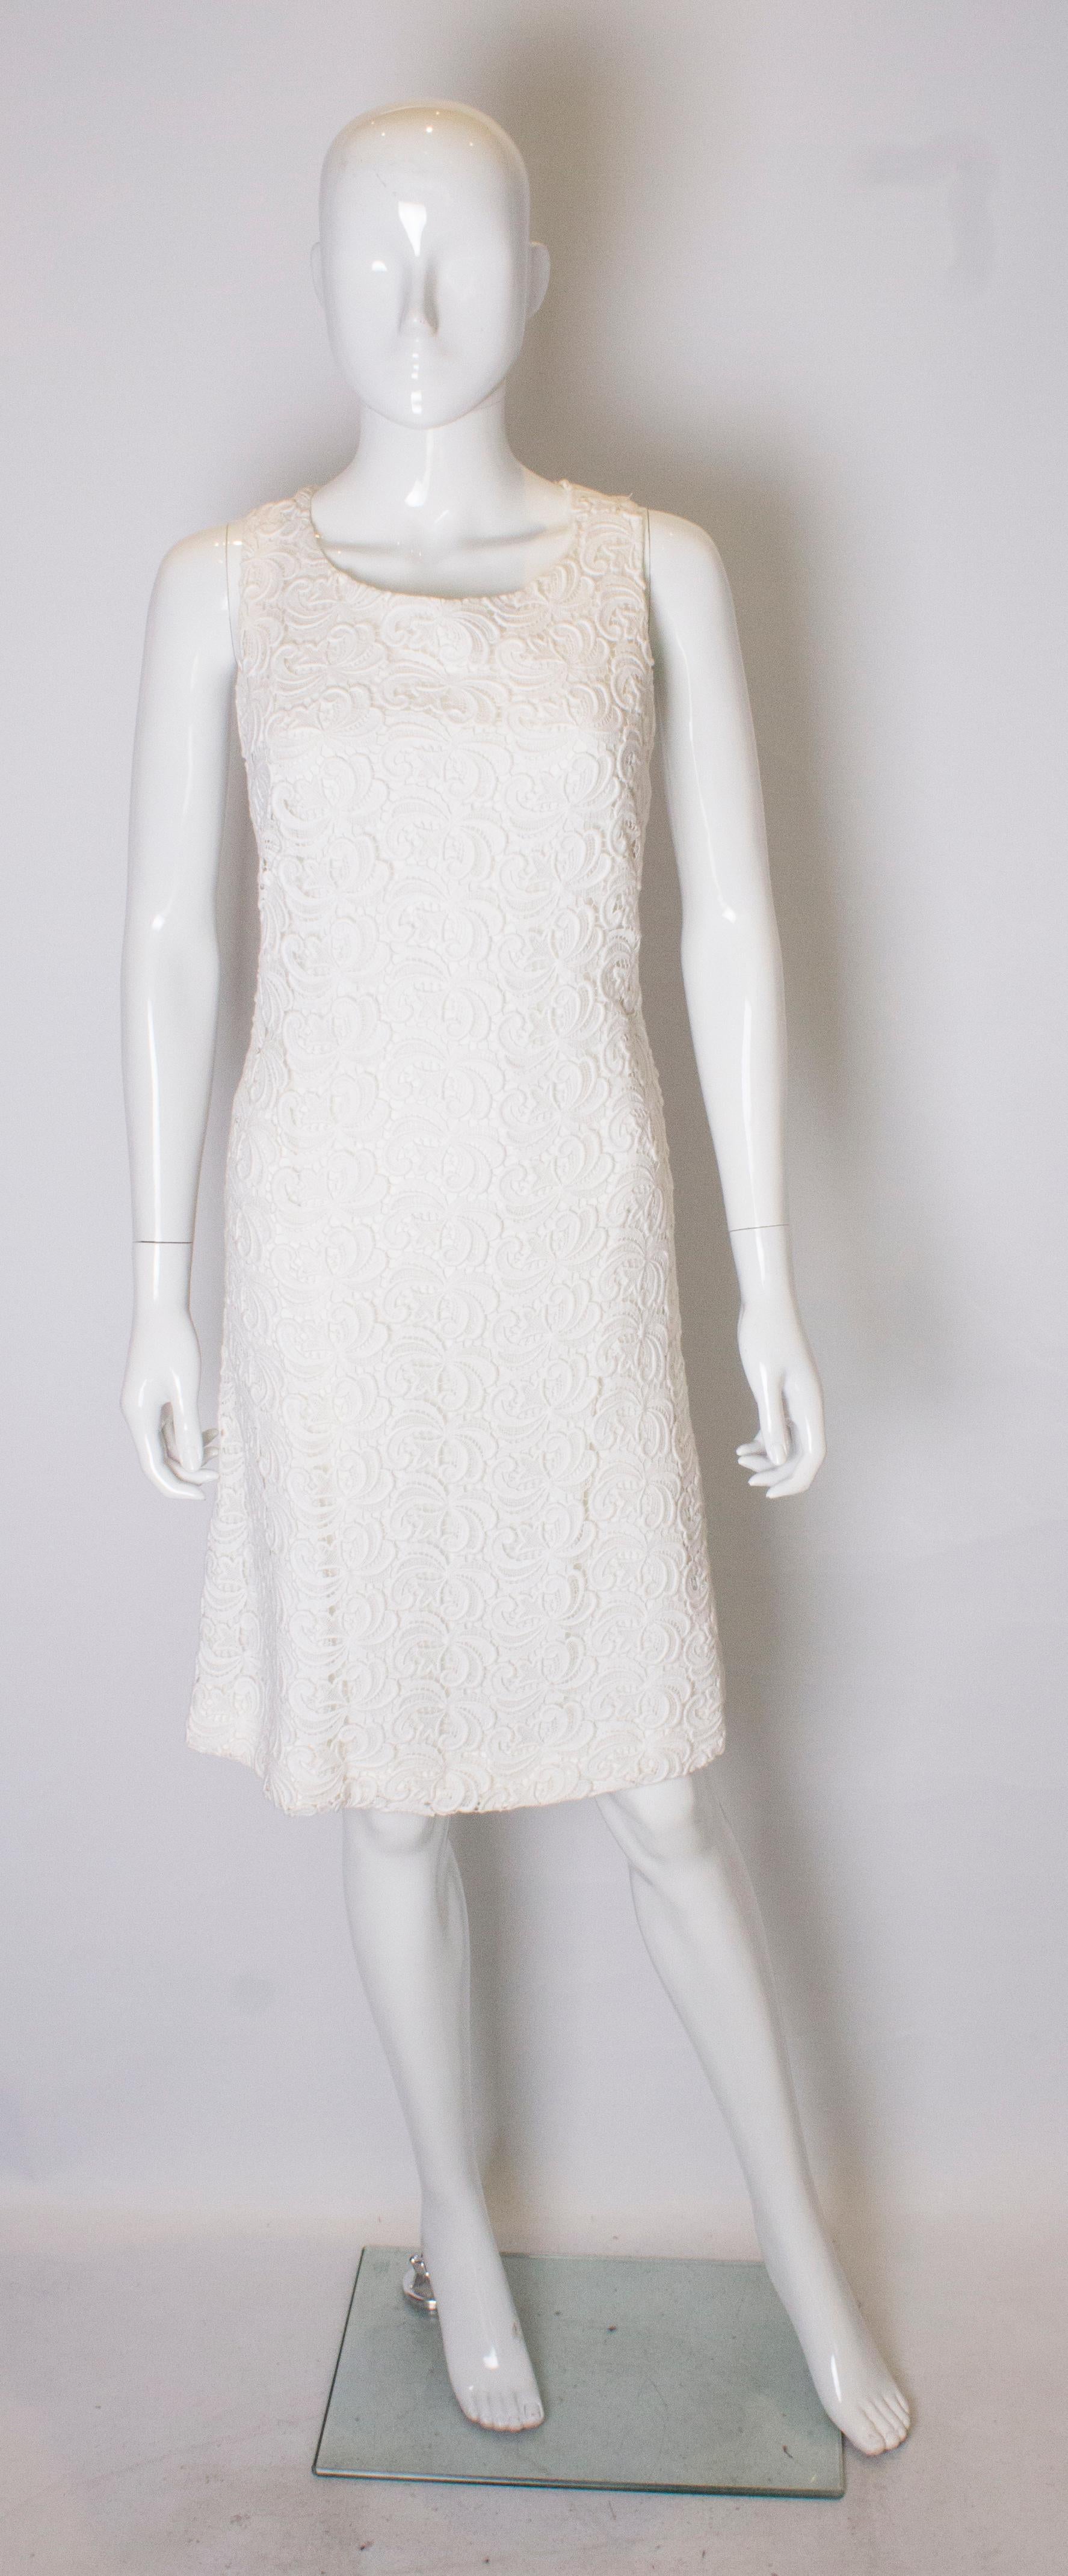 A head turning cocktail dress in white lace . The dress has a low round neckline, with crossover straps at the the back and a low back line. It is fully lined.